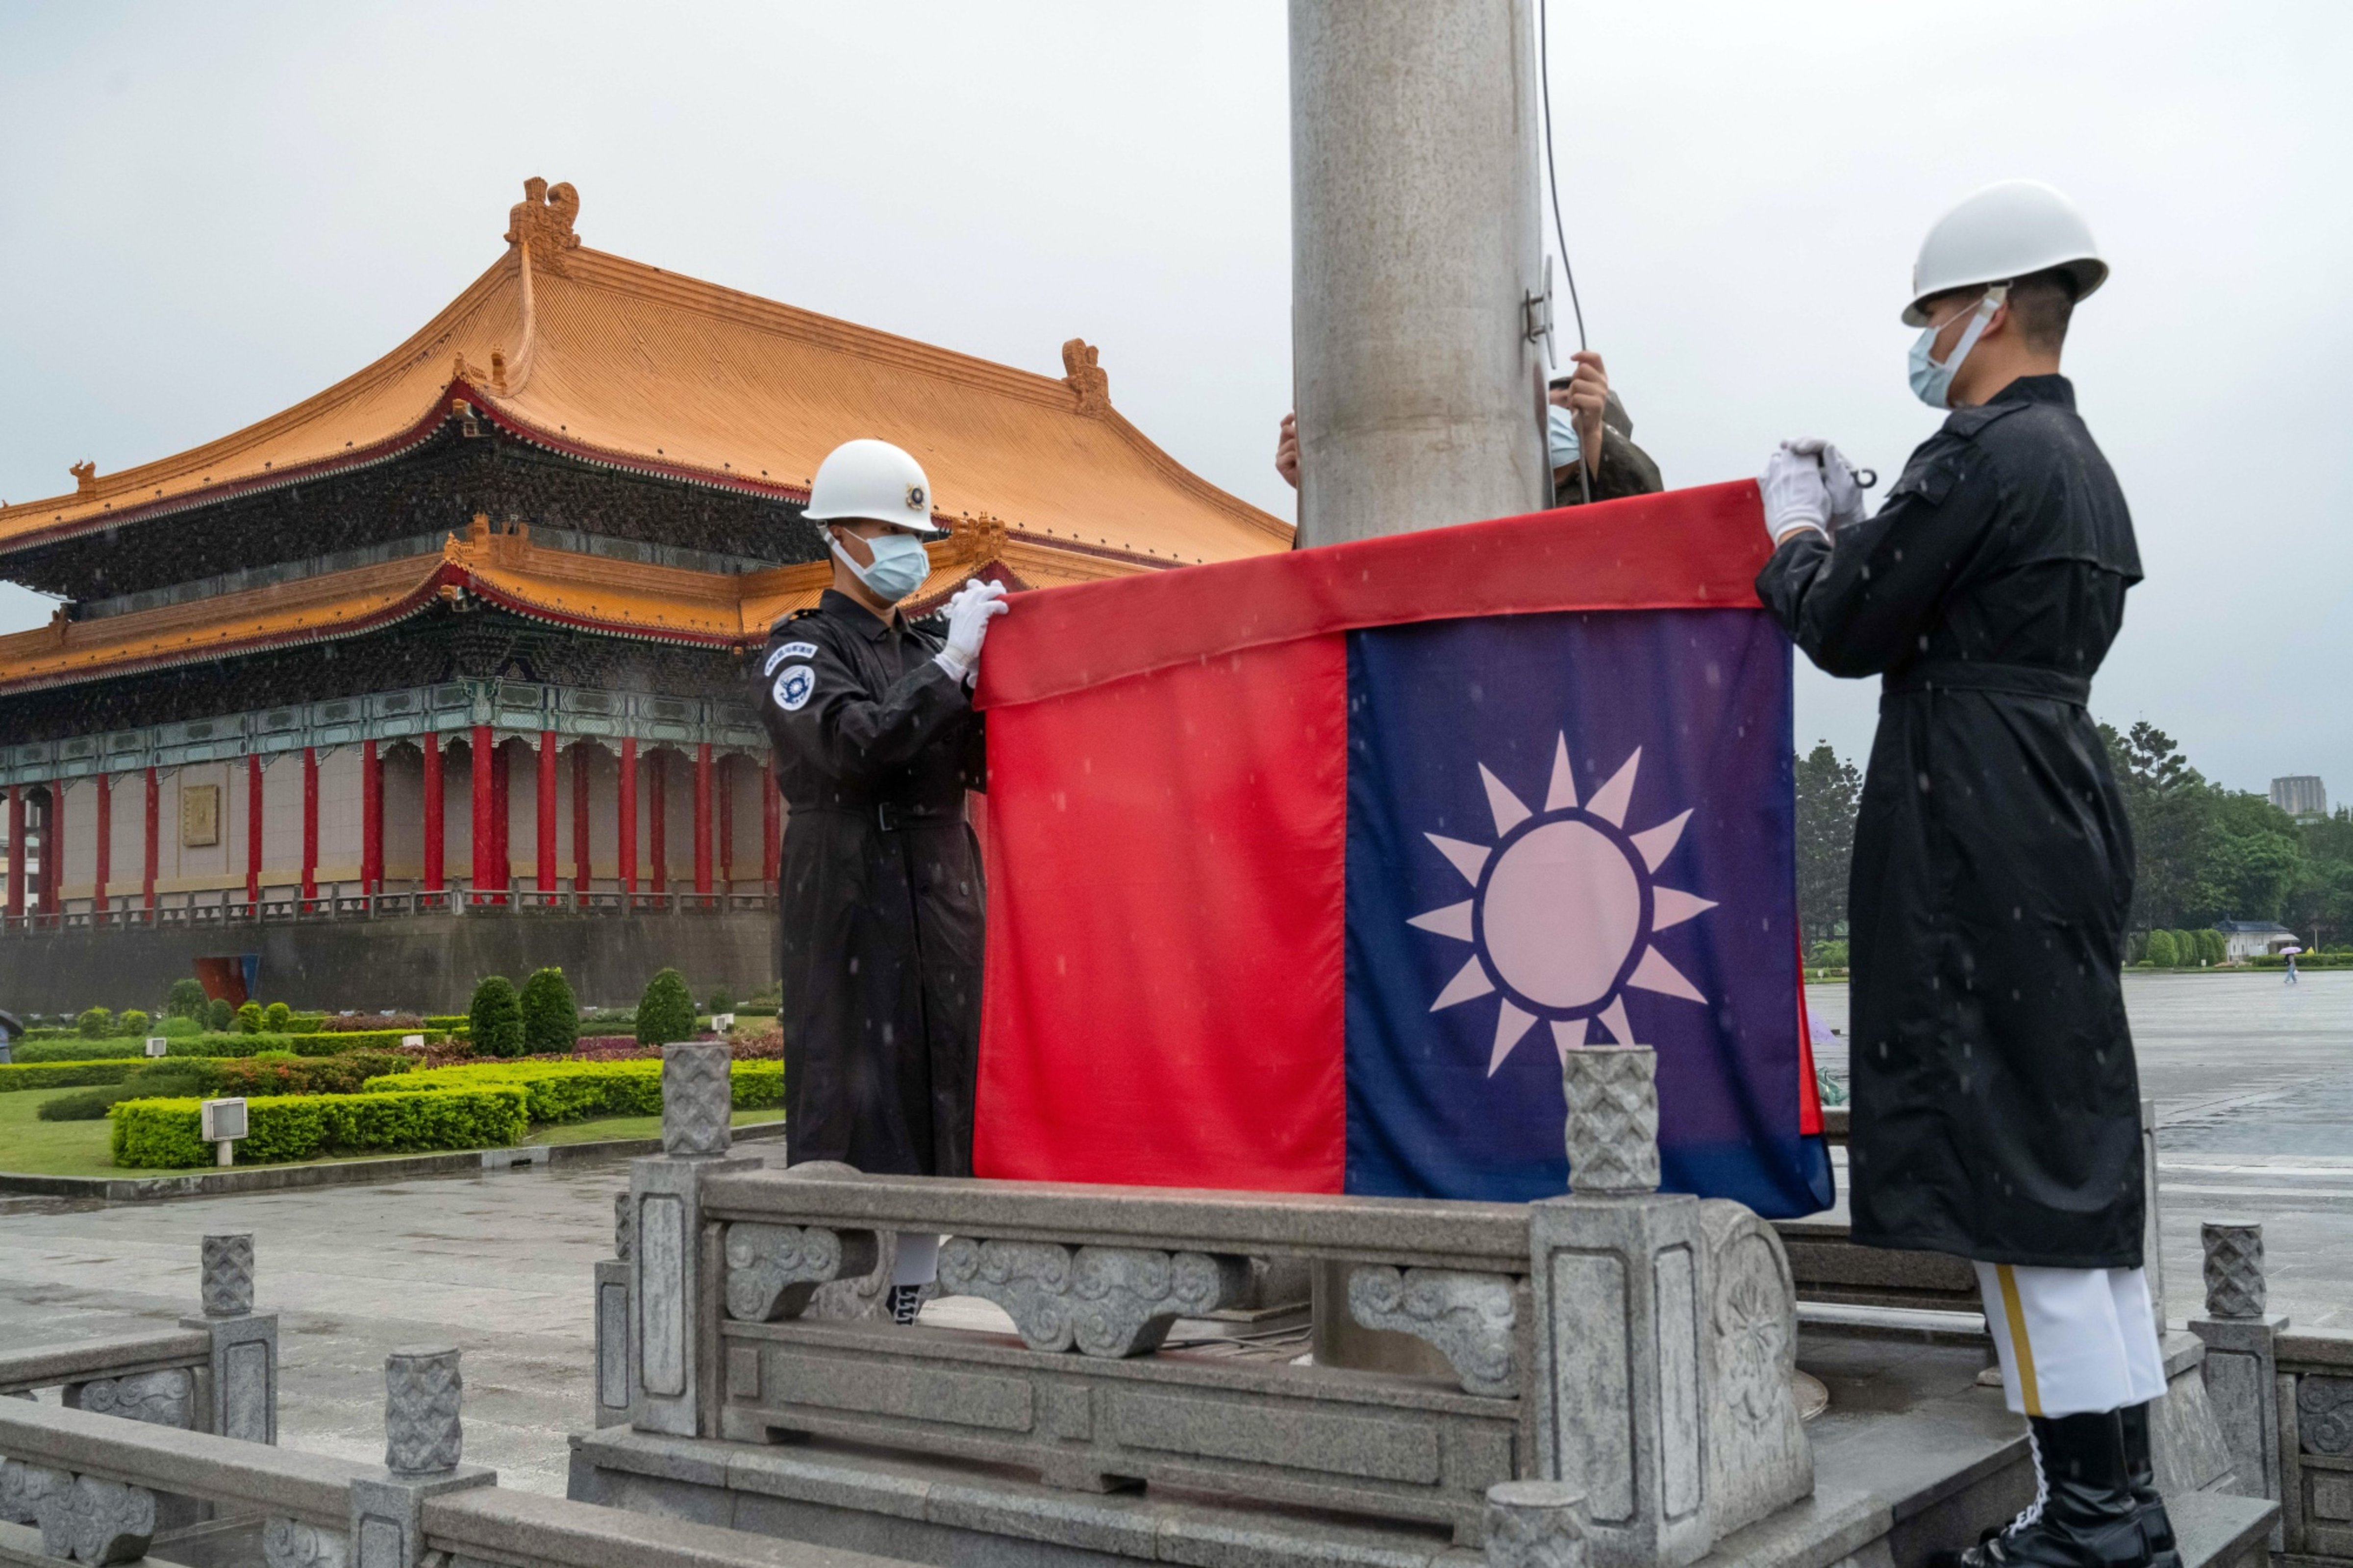 Honor guards wearing protective masks raise a Taiwanese flag at the National Chiang Kai-shek Memorial Hall in Taipei, Taiwan, on Wednesday, June 3, 2021. Taiwan (Bloomberg Finance LP)